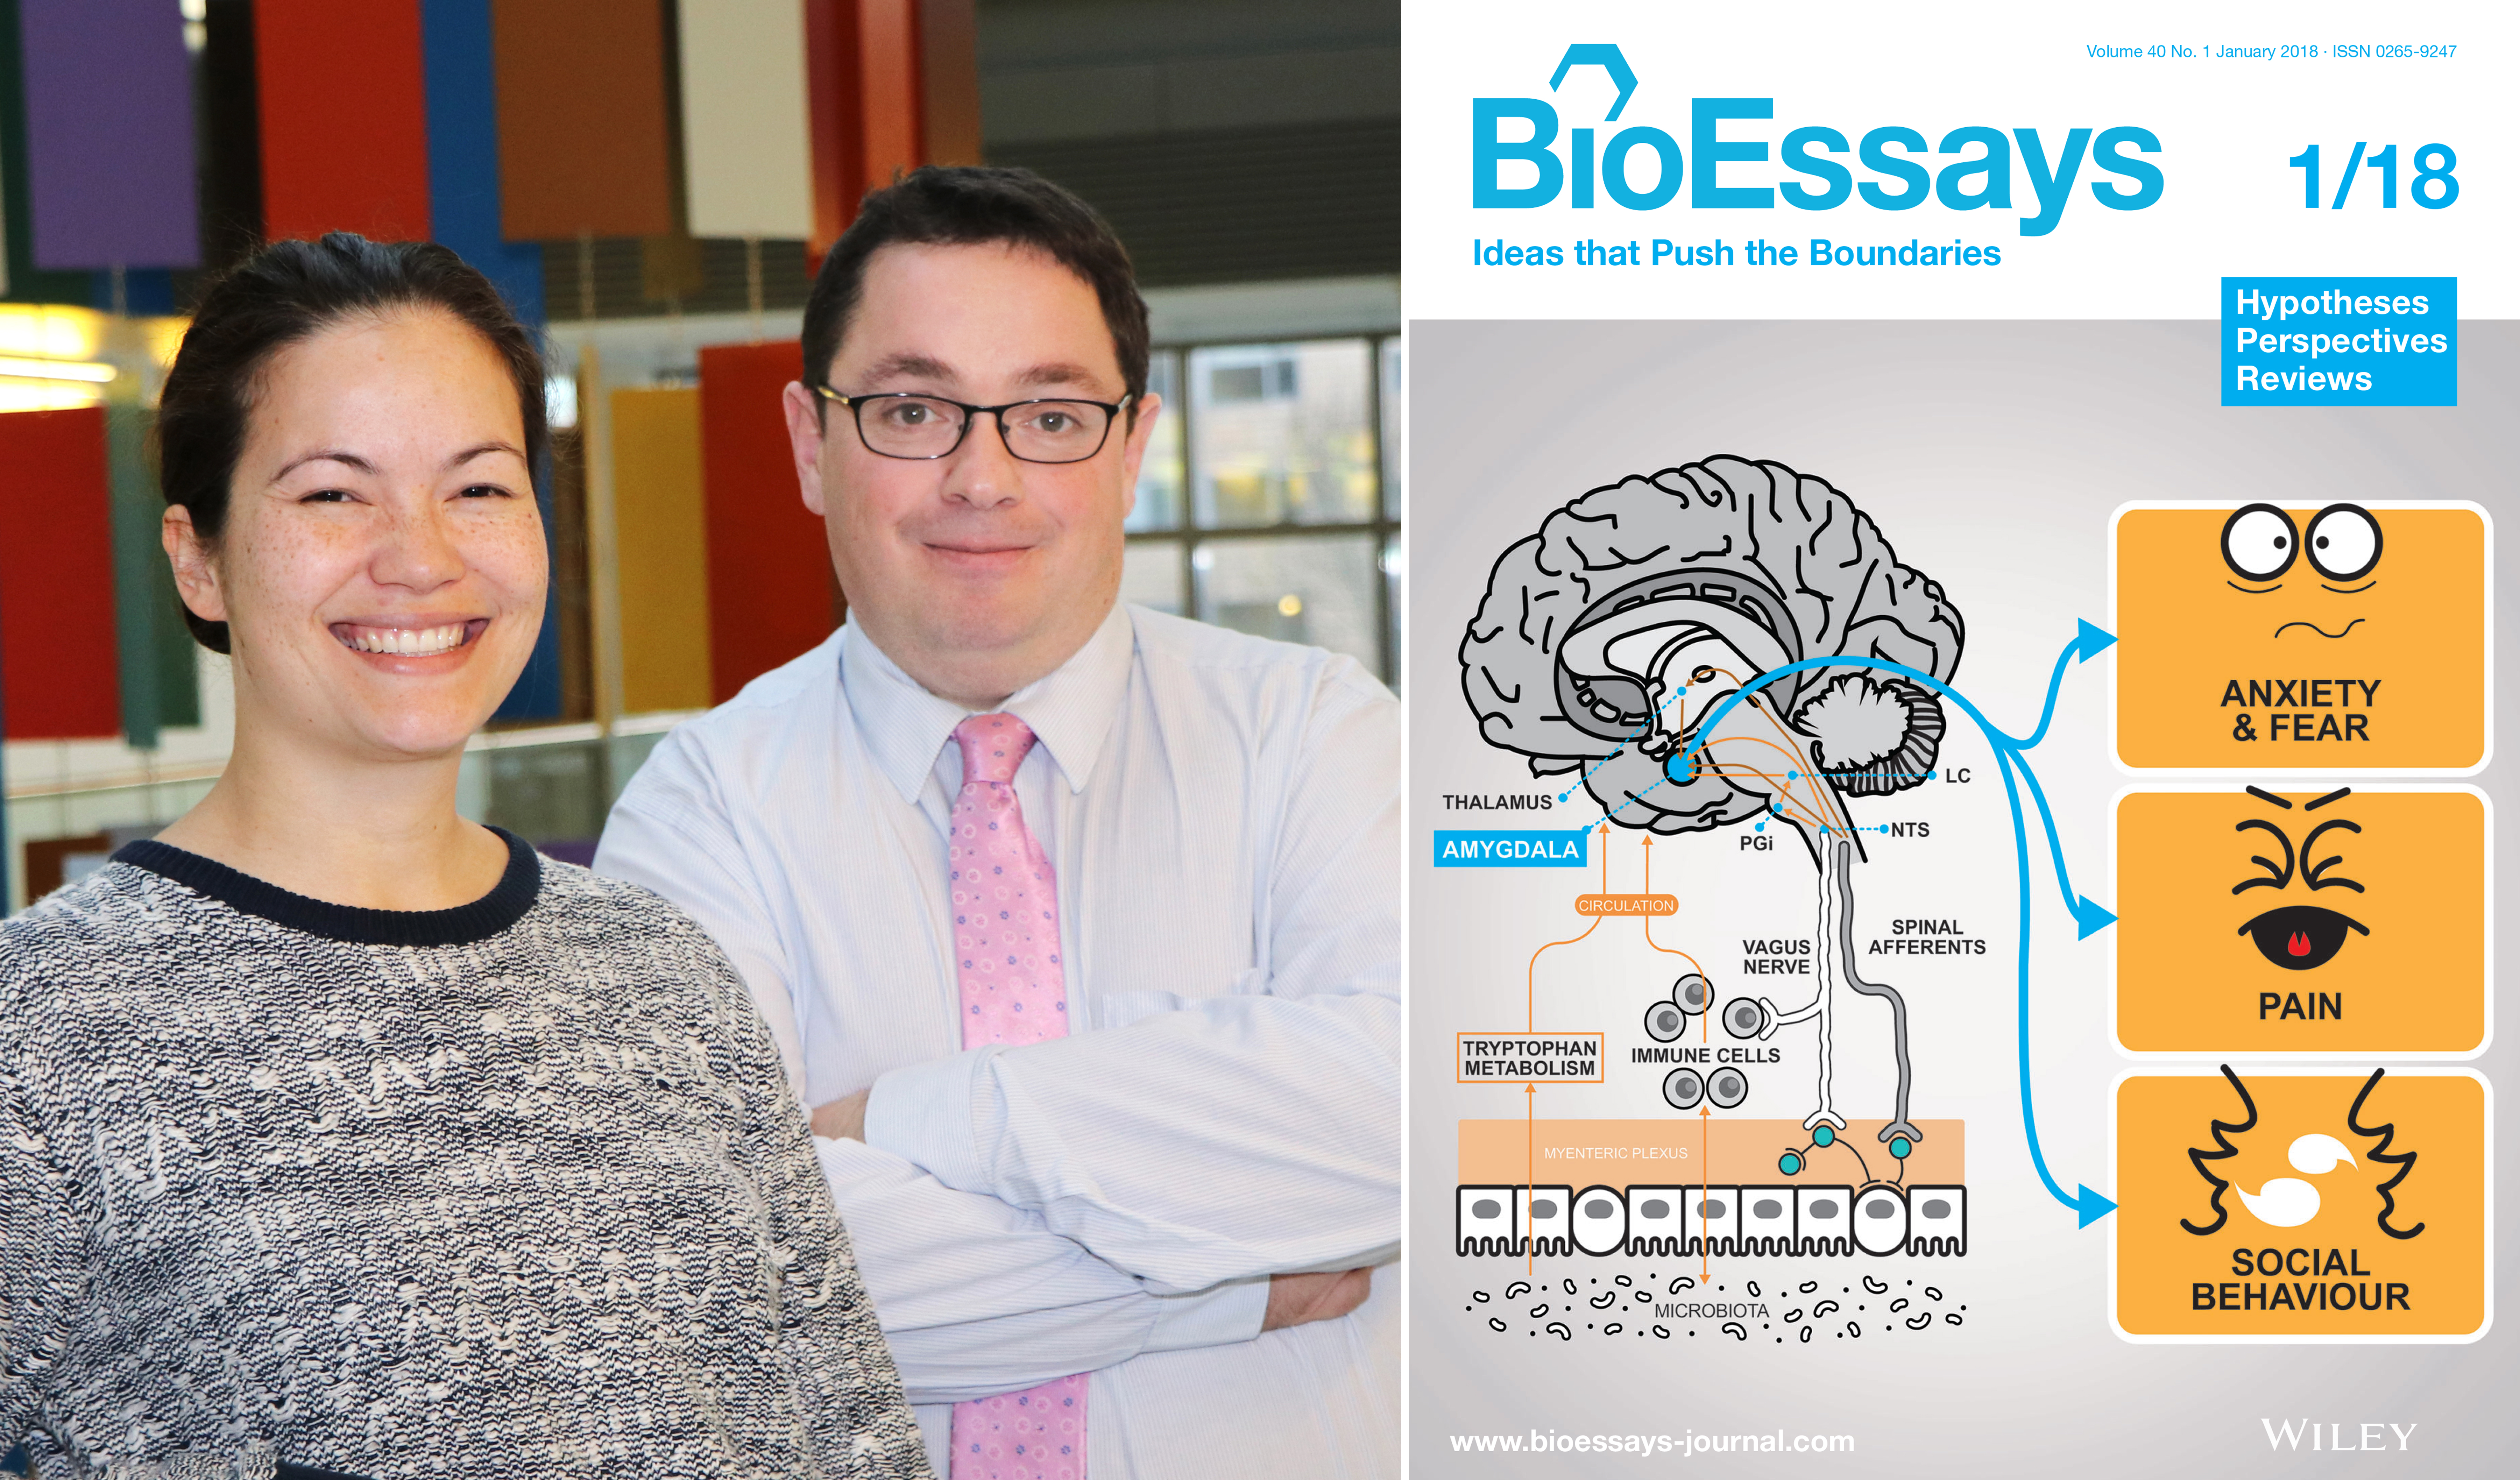  BioEssays cover features Cowan, Cryan article